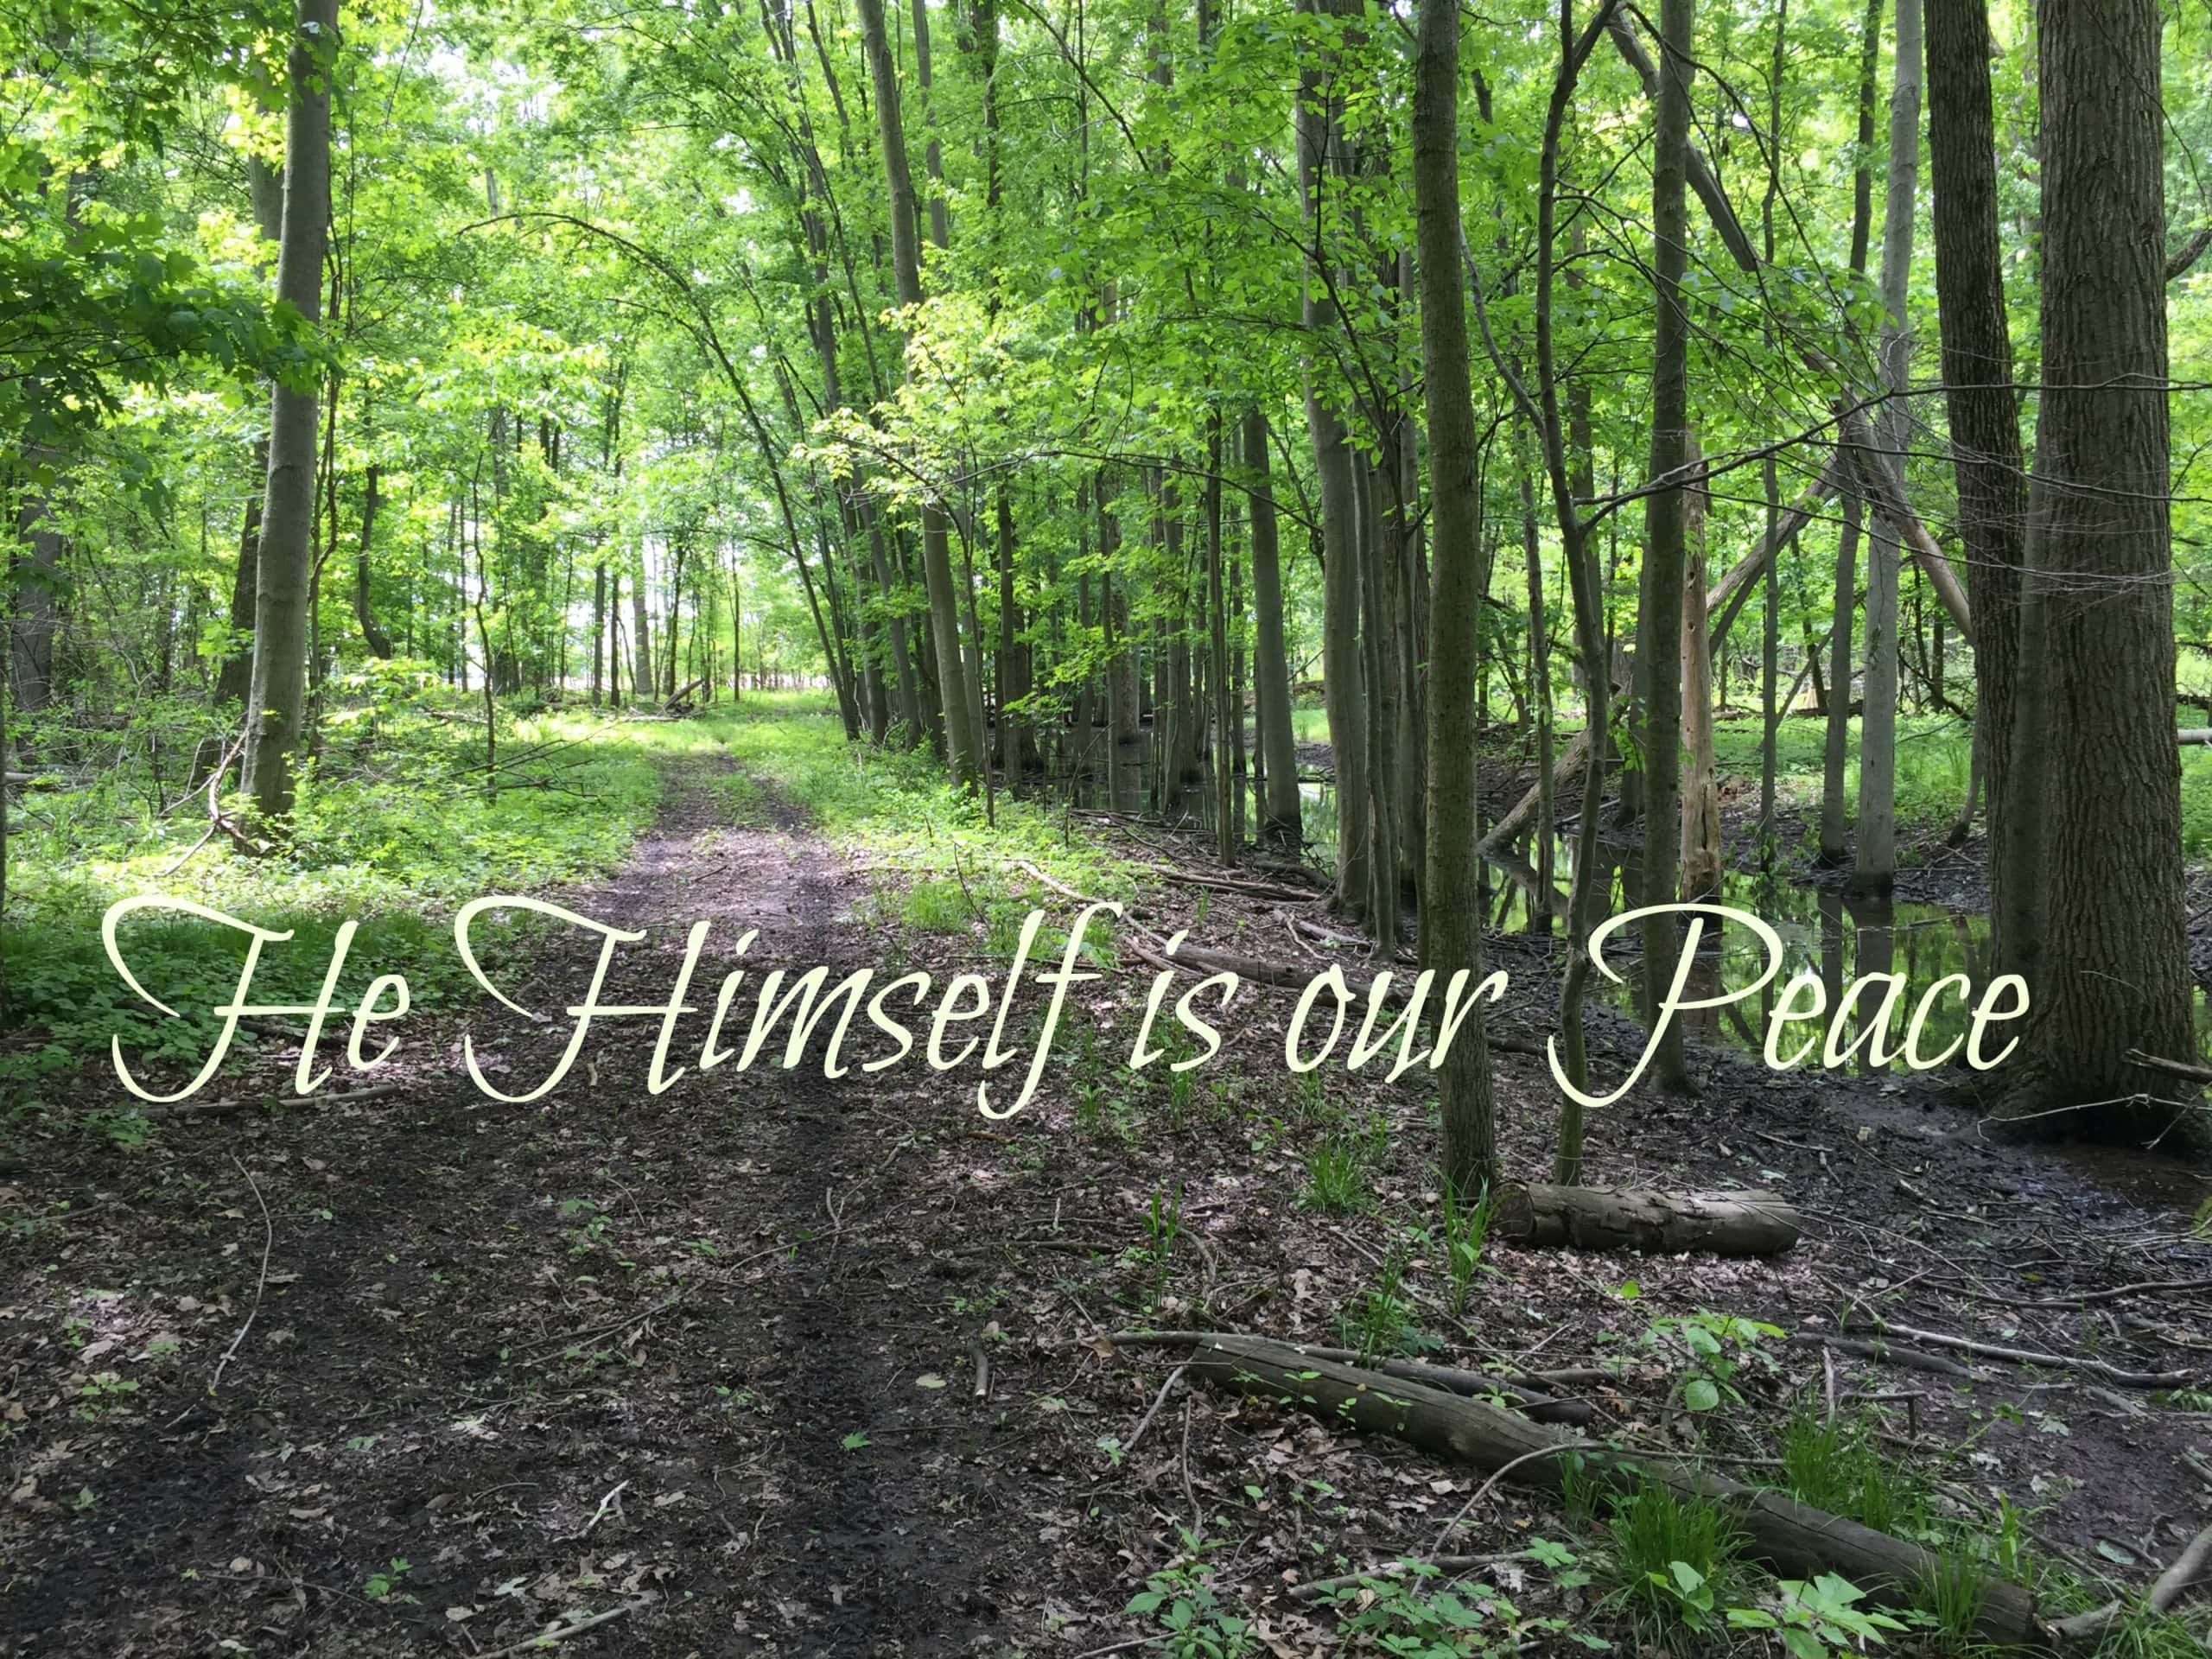 He is our Peace